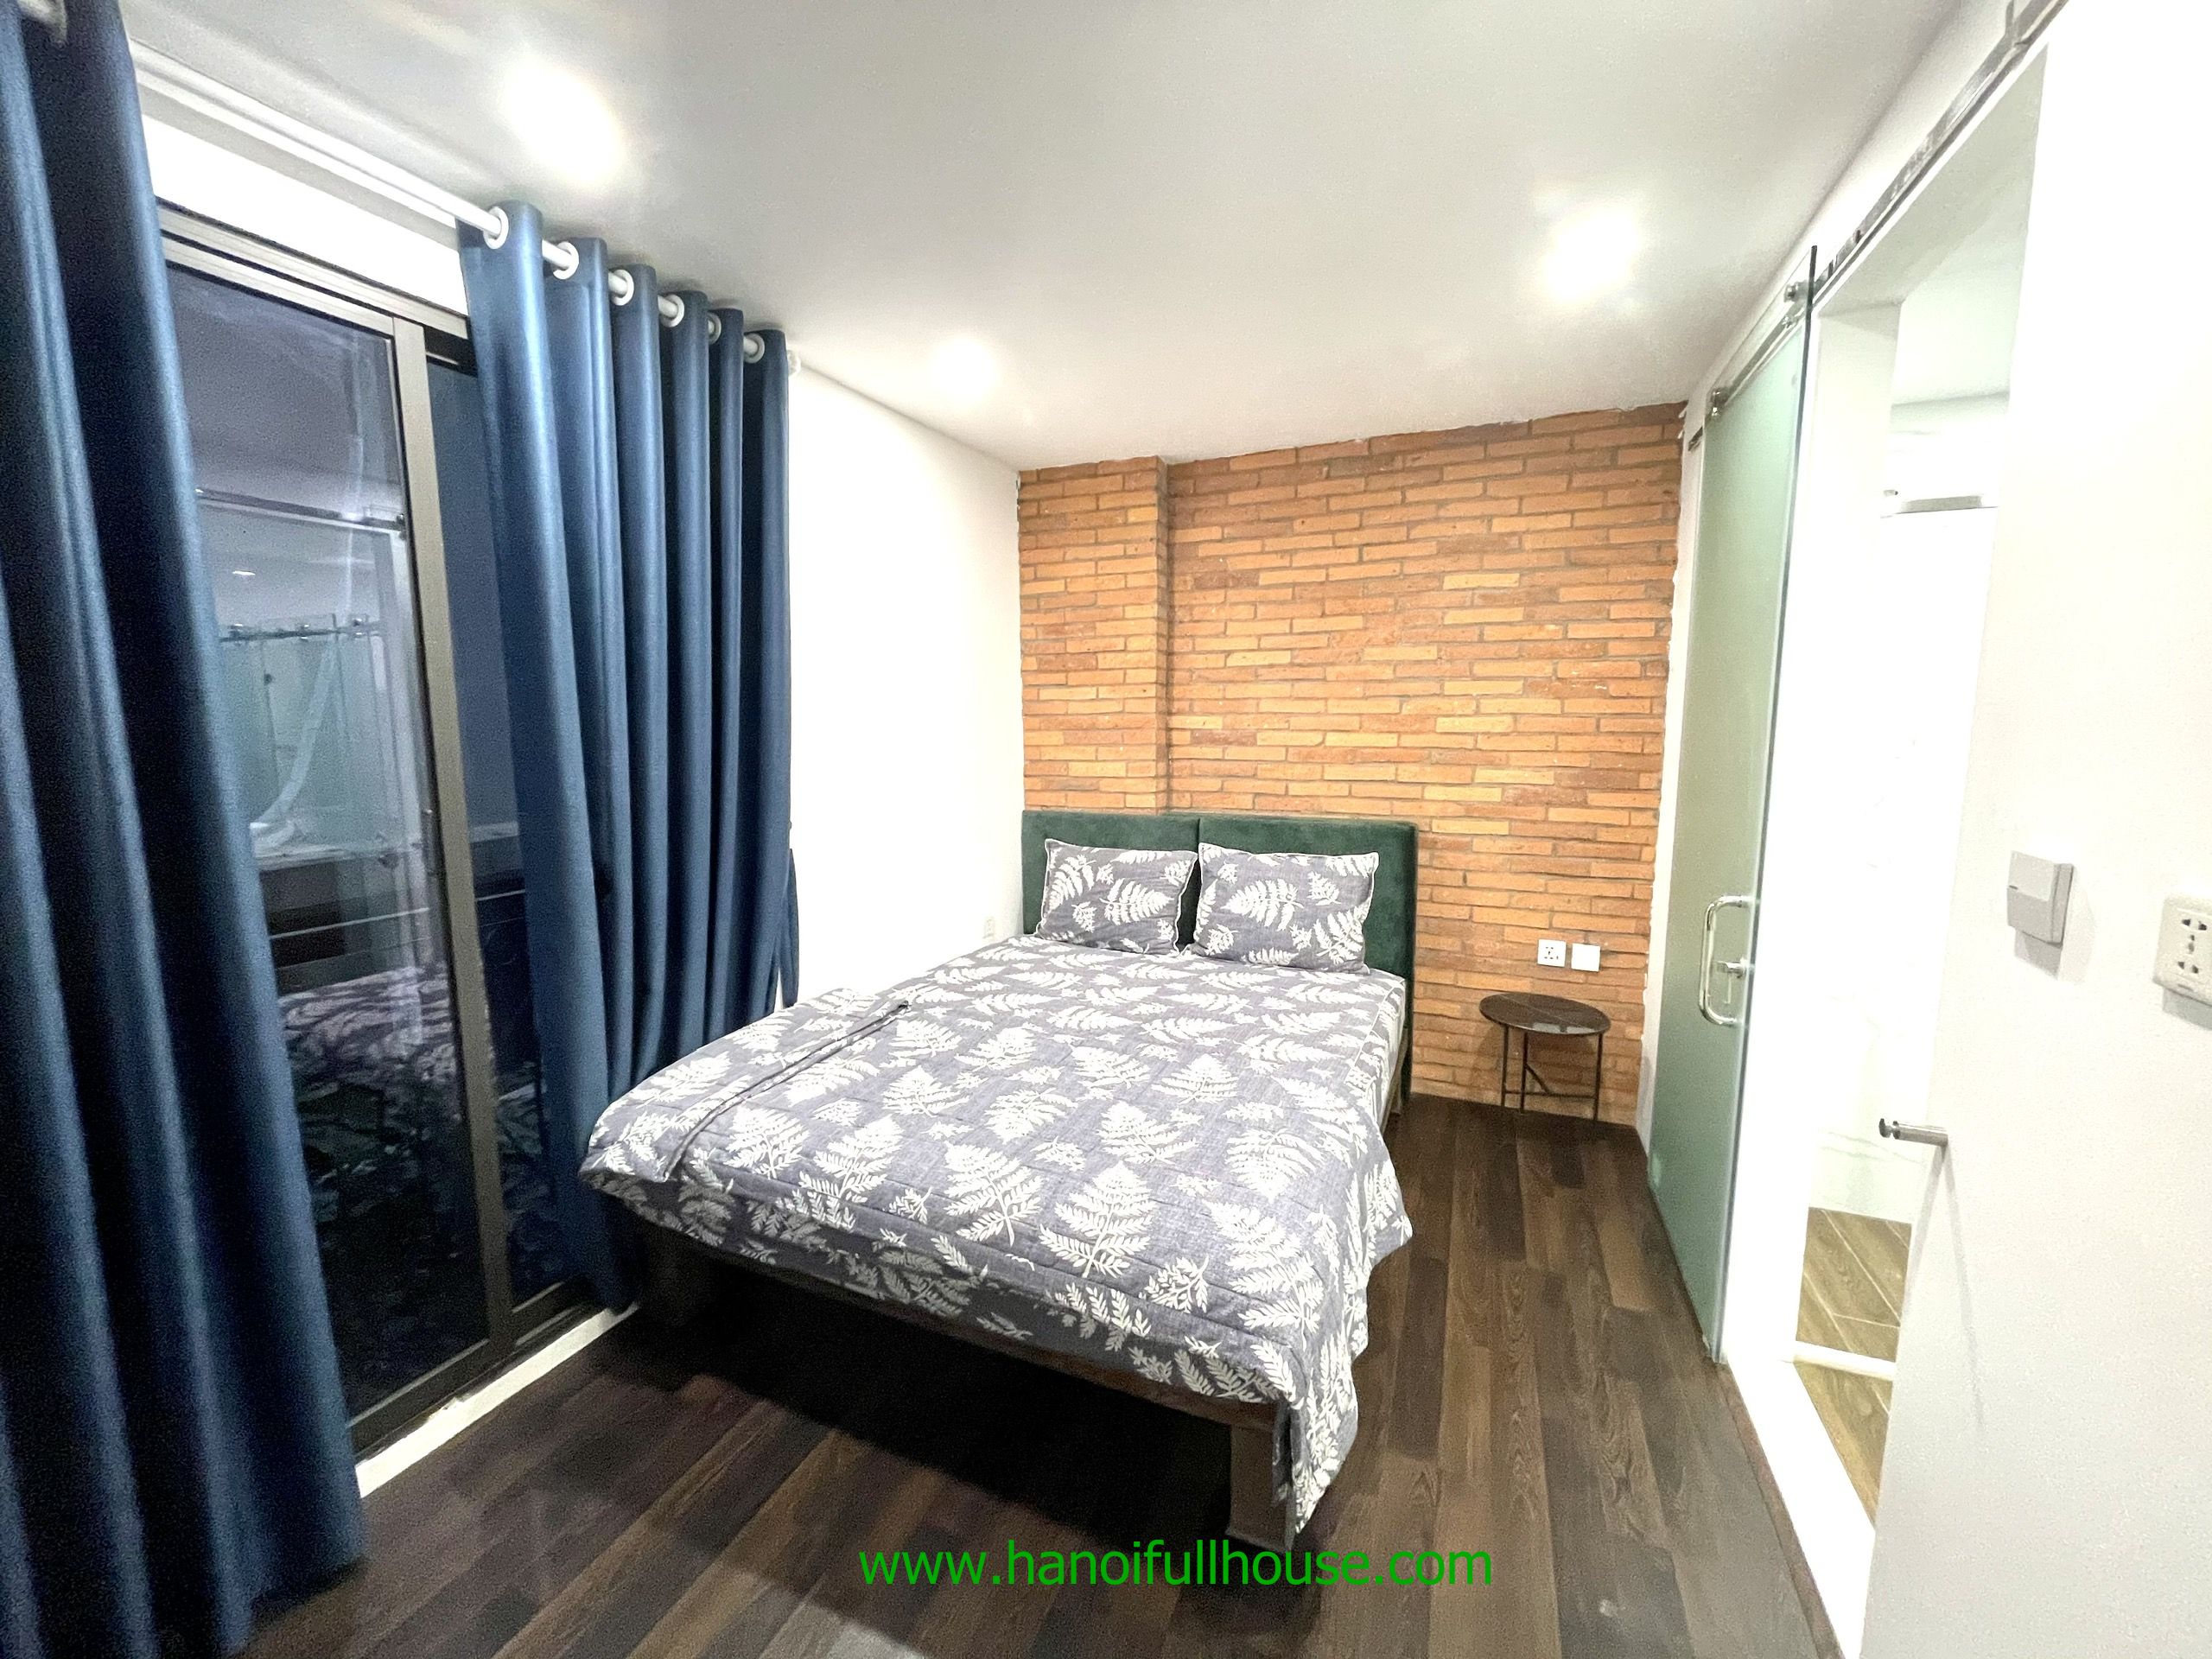 Cheap price for 2 bedroom apartment near West lake for rent